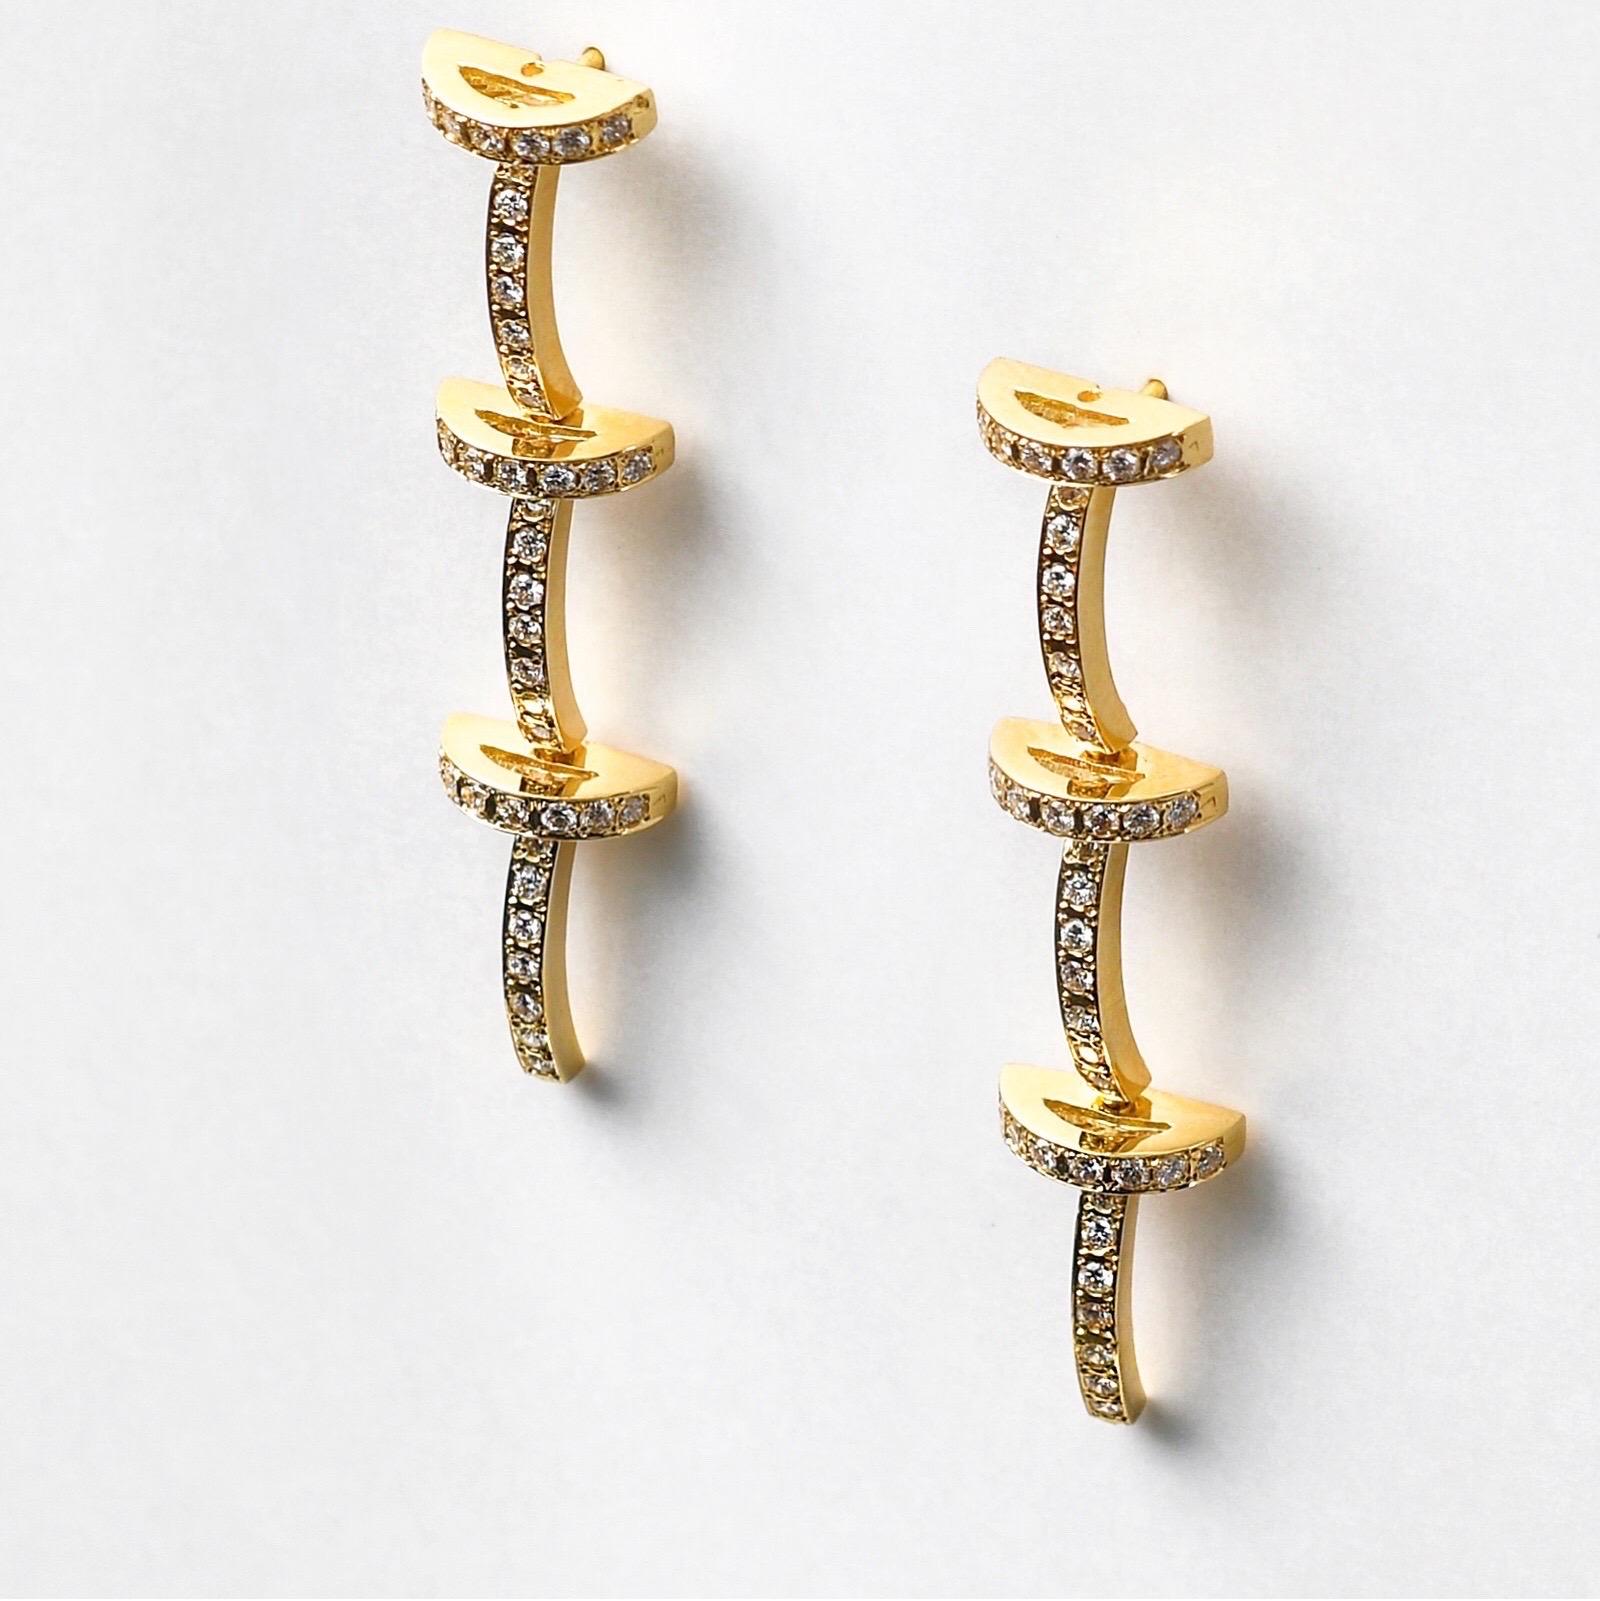 The 'T’, drop earrings are crafted in 18k gold, hallmarked in Cyprus. These stunning, minimalist drop earrings, come in a highly polished finish and feature 0,85 Cts of White, VS Diamonds. They are light on the ears and very comfortable to wear. The